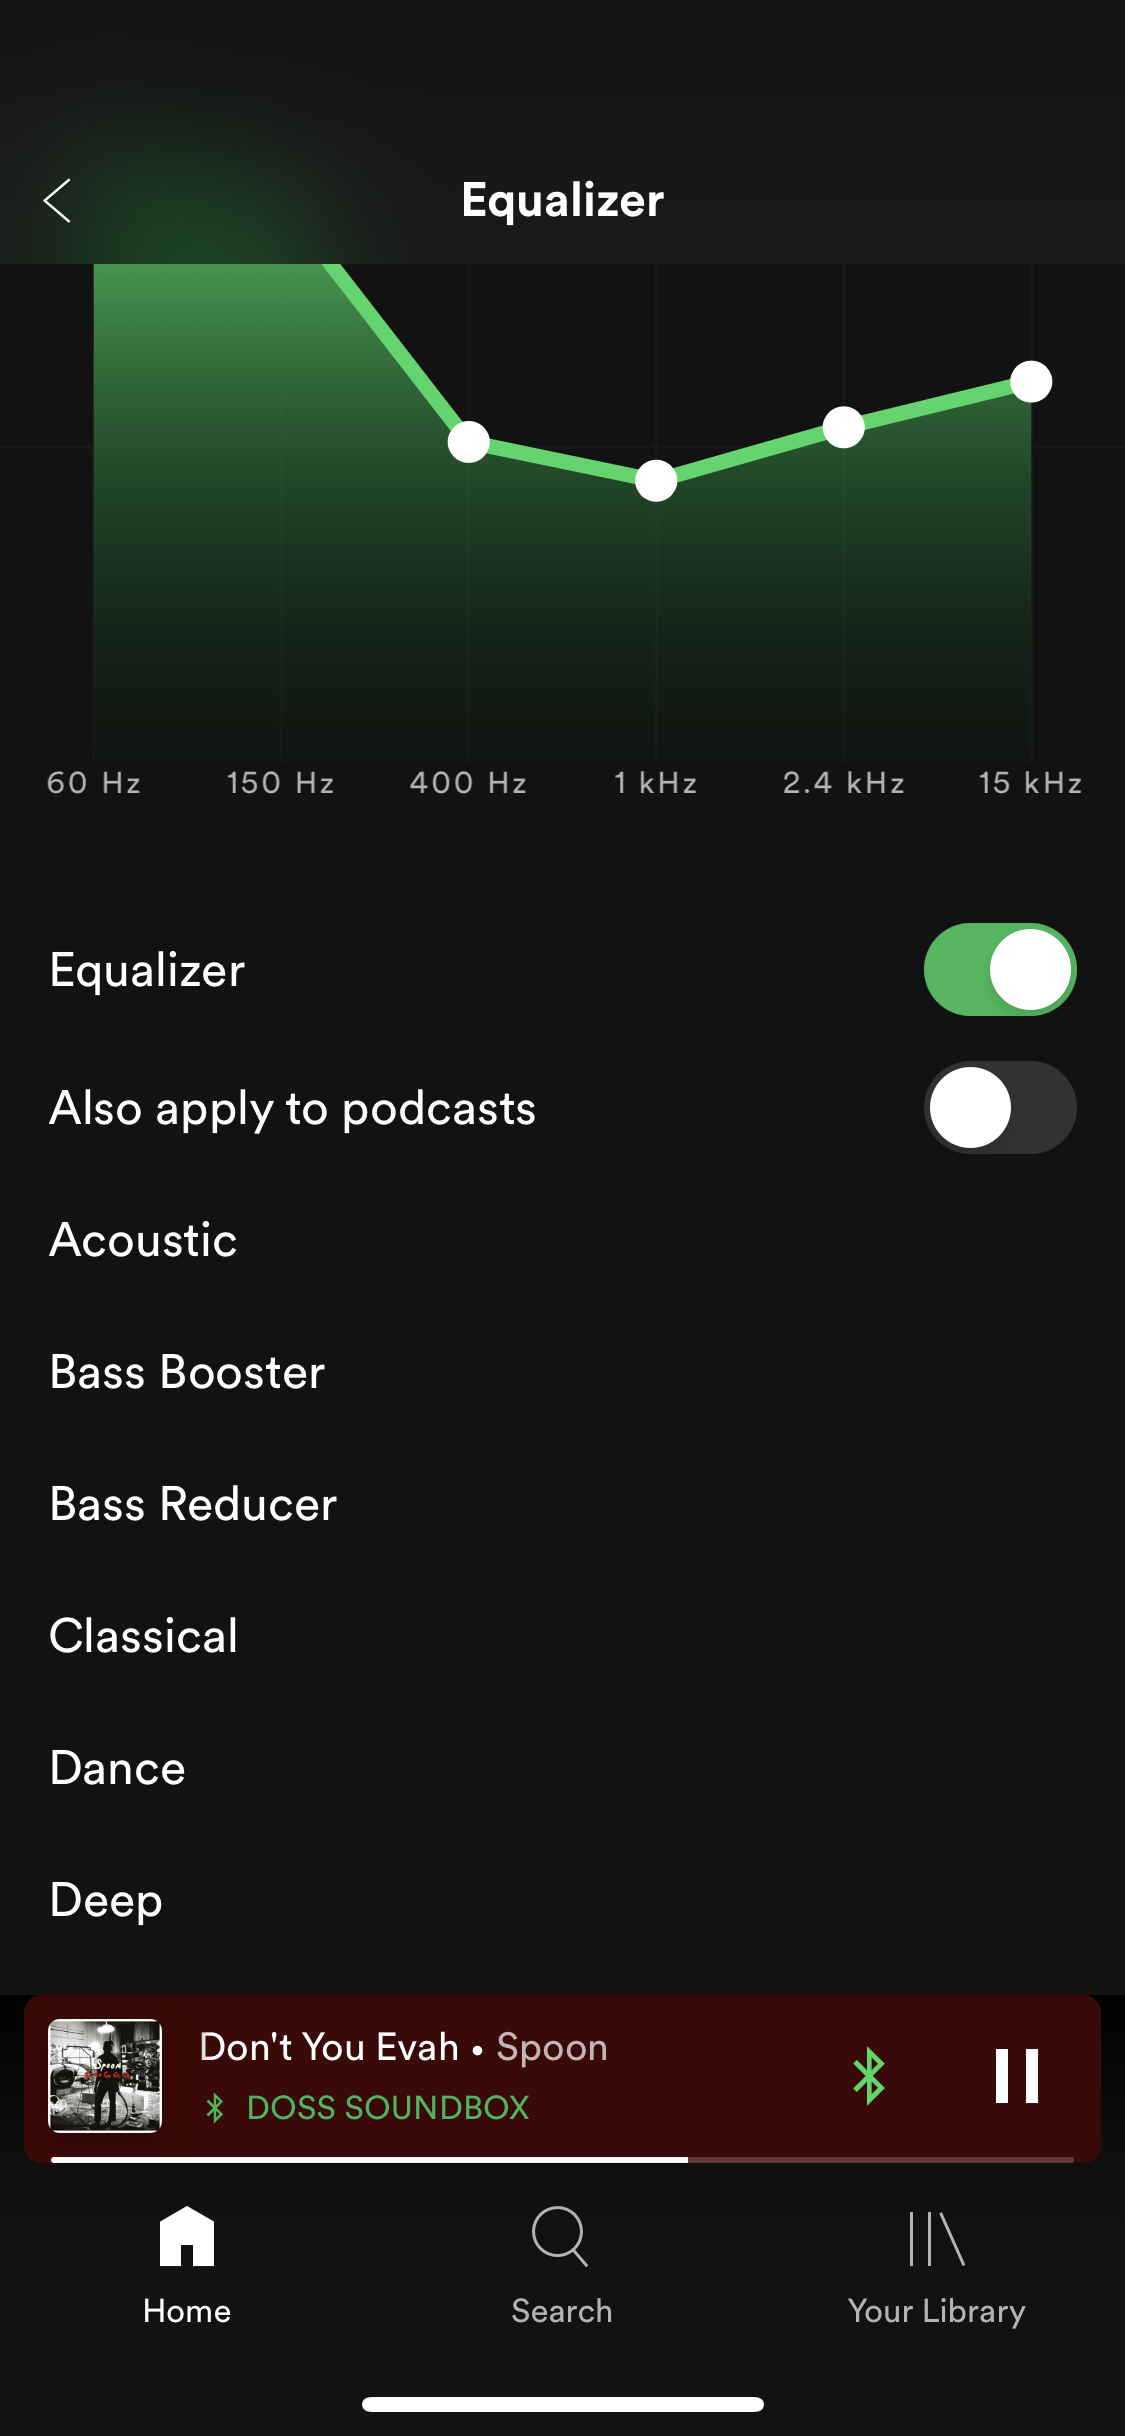 iOS] Equalizer partially hidden above window - The Spotify Community